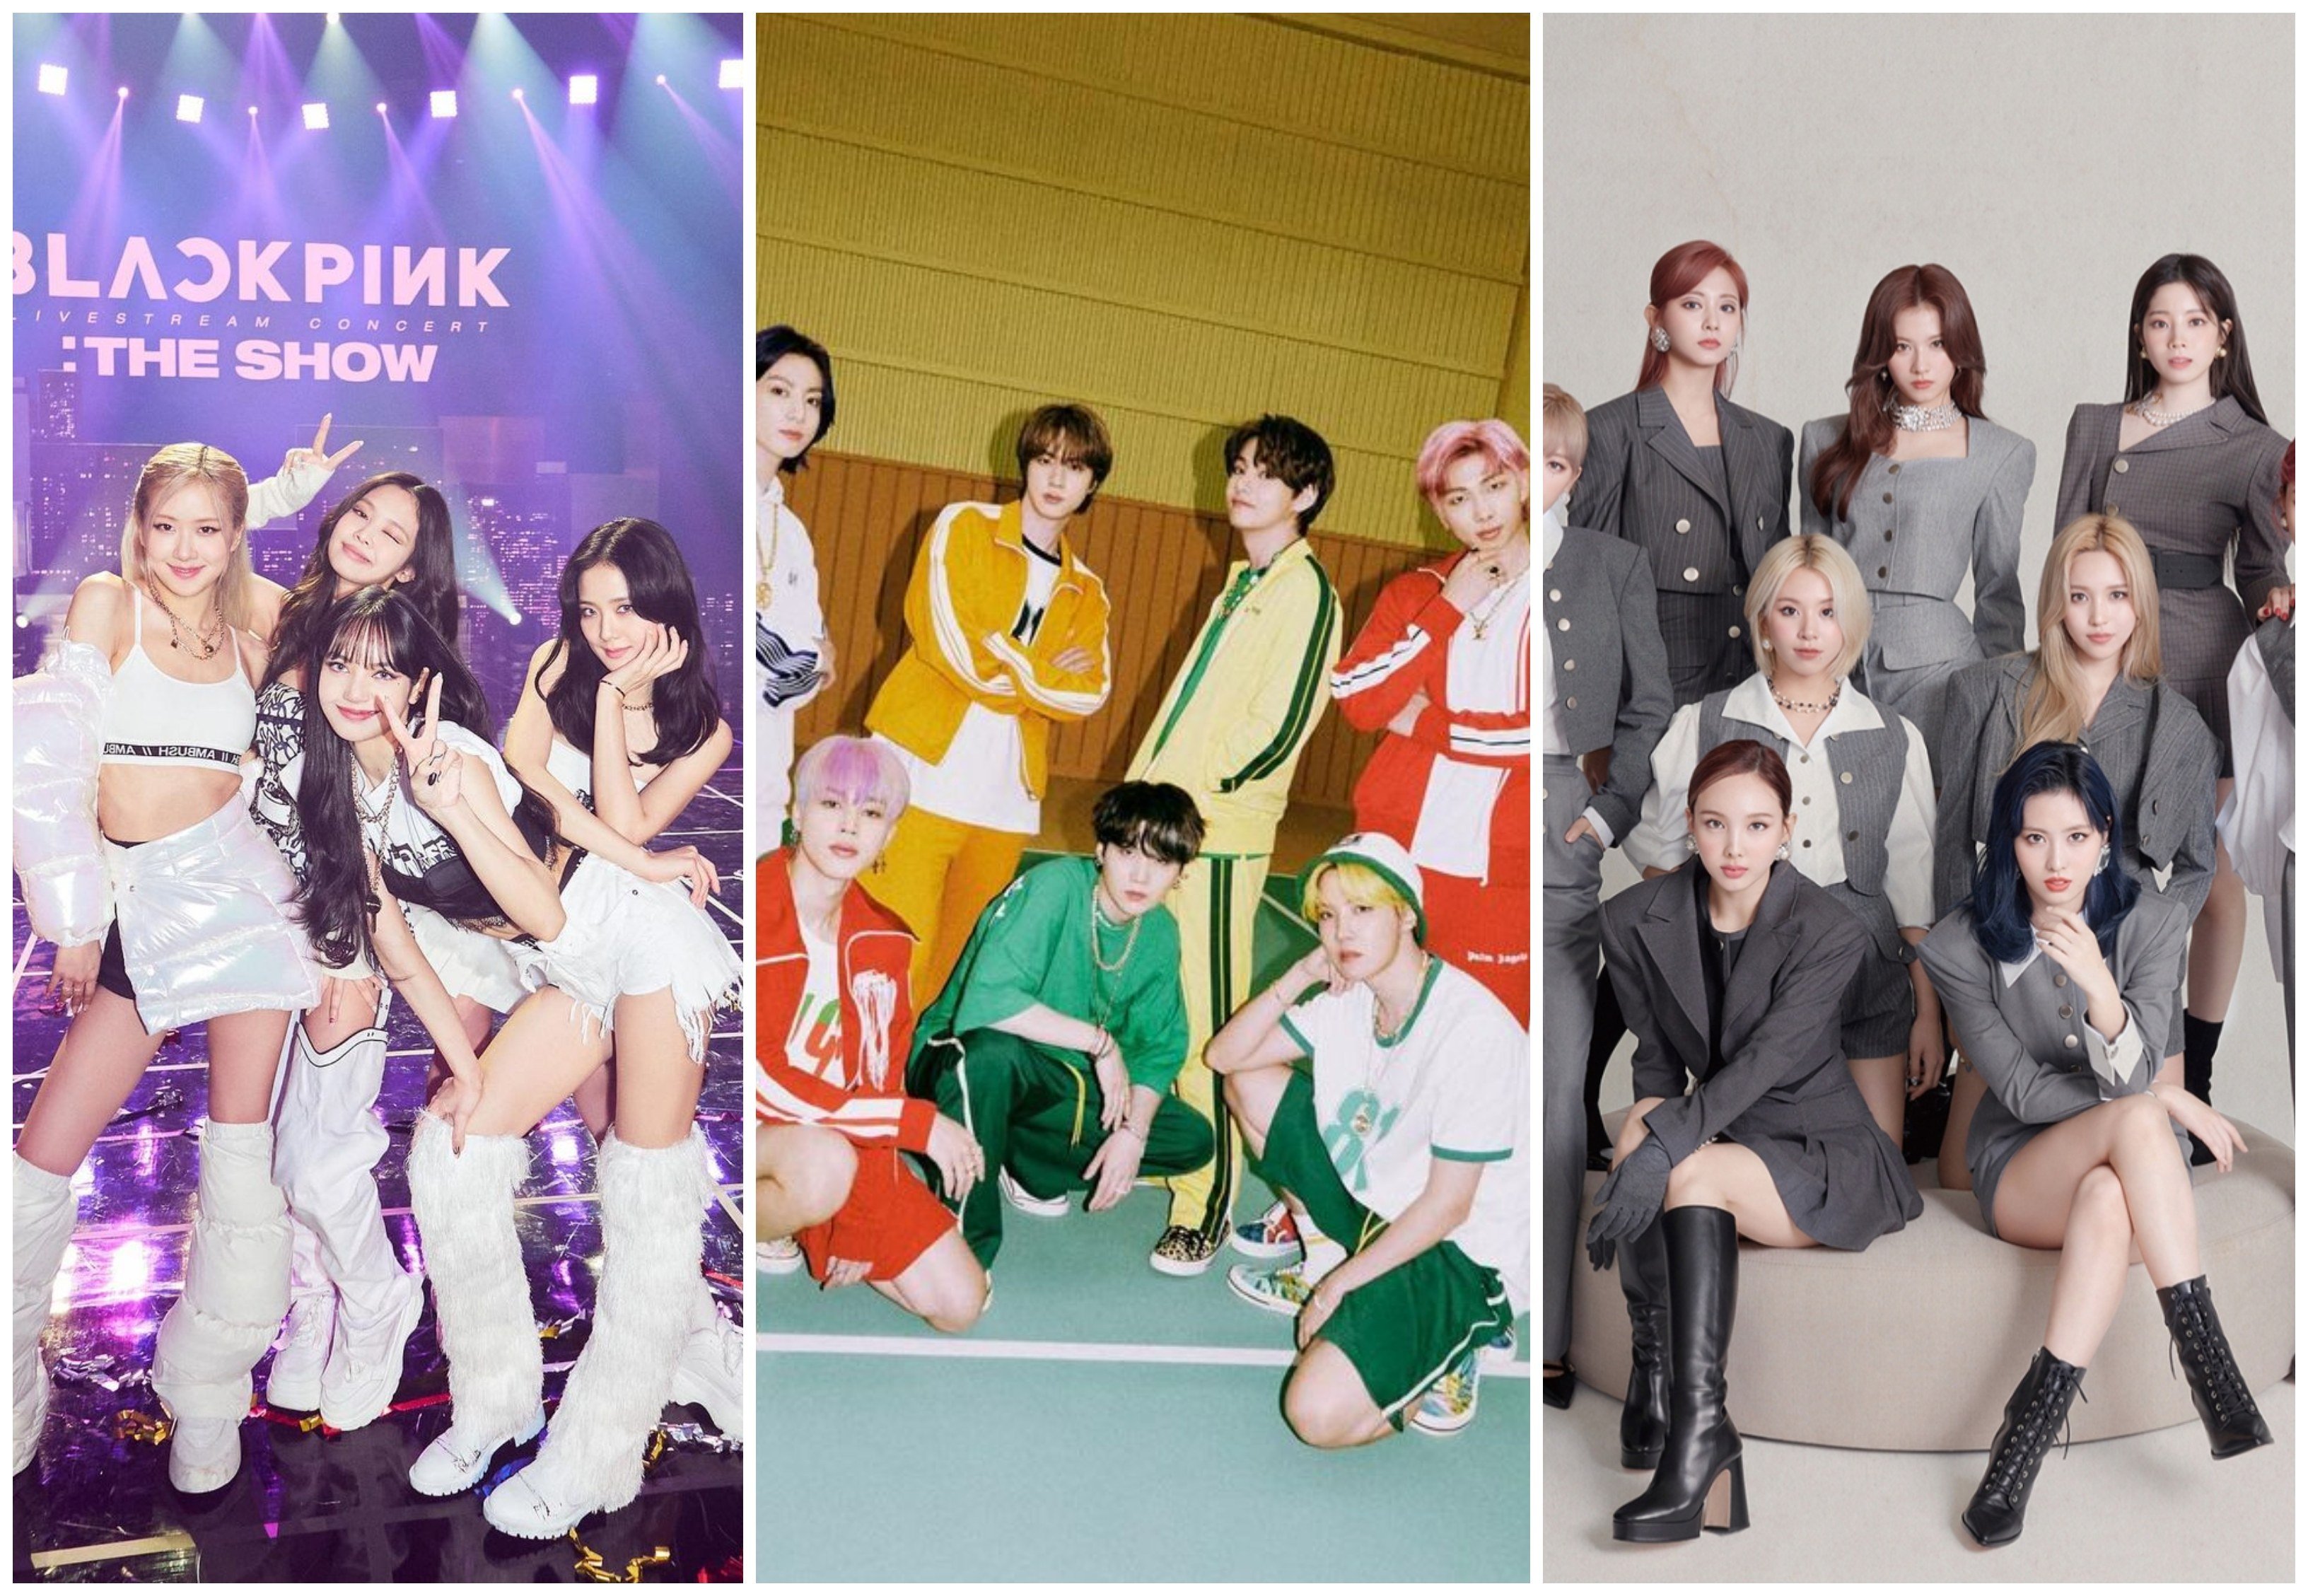 Blackpink, BTS and Twice are all doing very well for themselves in K-pop showbiz. Photos: @blackpinkofficial, @bts.bighitofficial/Instagram; JYP Entertainment